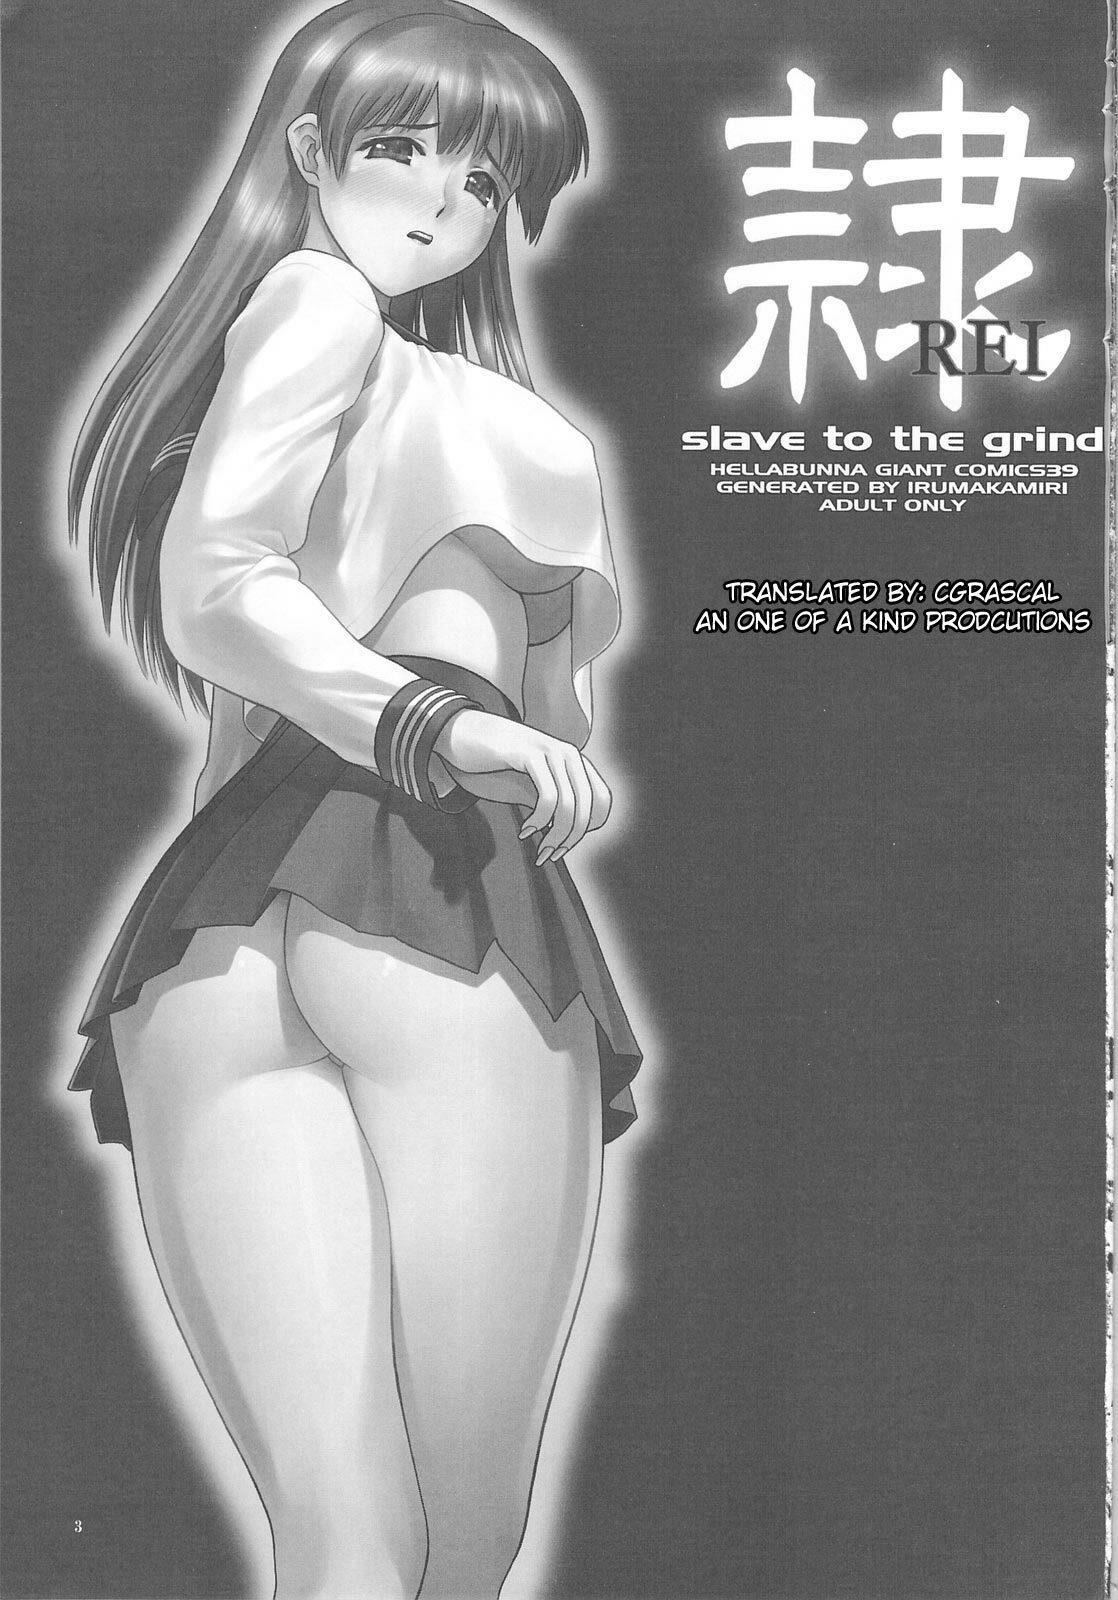 (C75) [Hellabunna (Iruma Kamiri)] REI - slave to the grind - REI 06: CHAPTER 05 (Dead or Alive) [English] [CGrascal] page 2 full